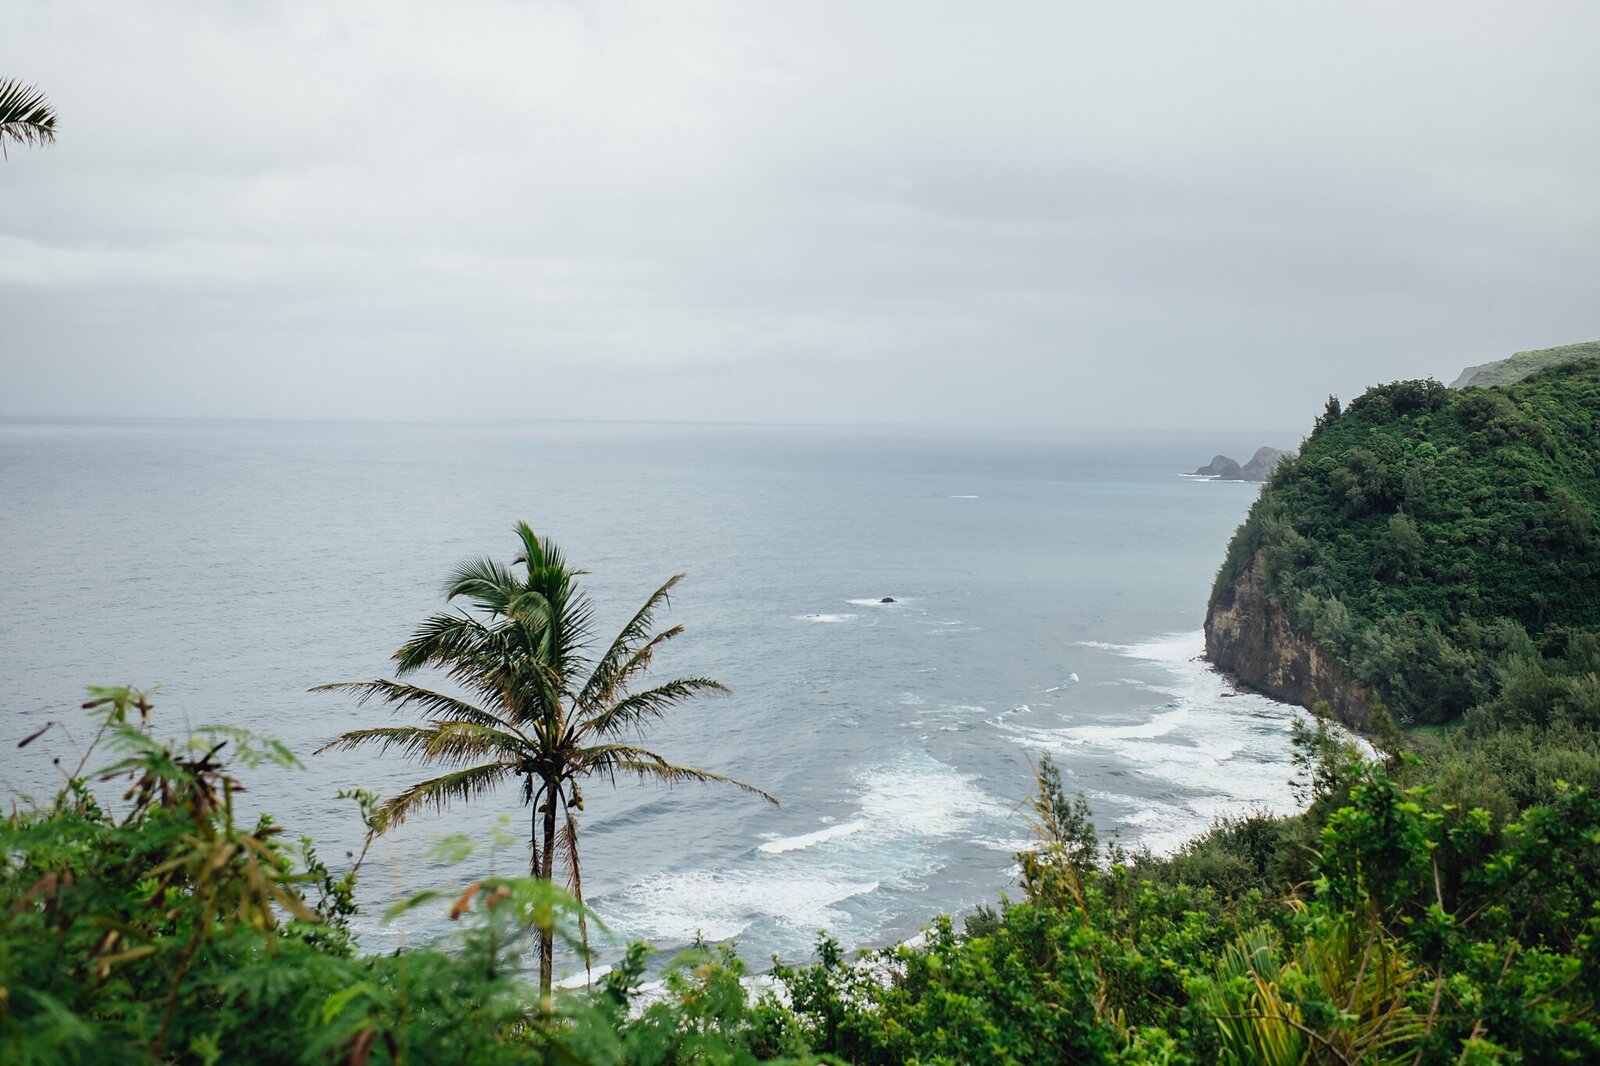 views of pololu valley from the overlook